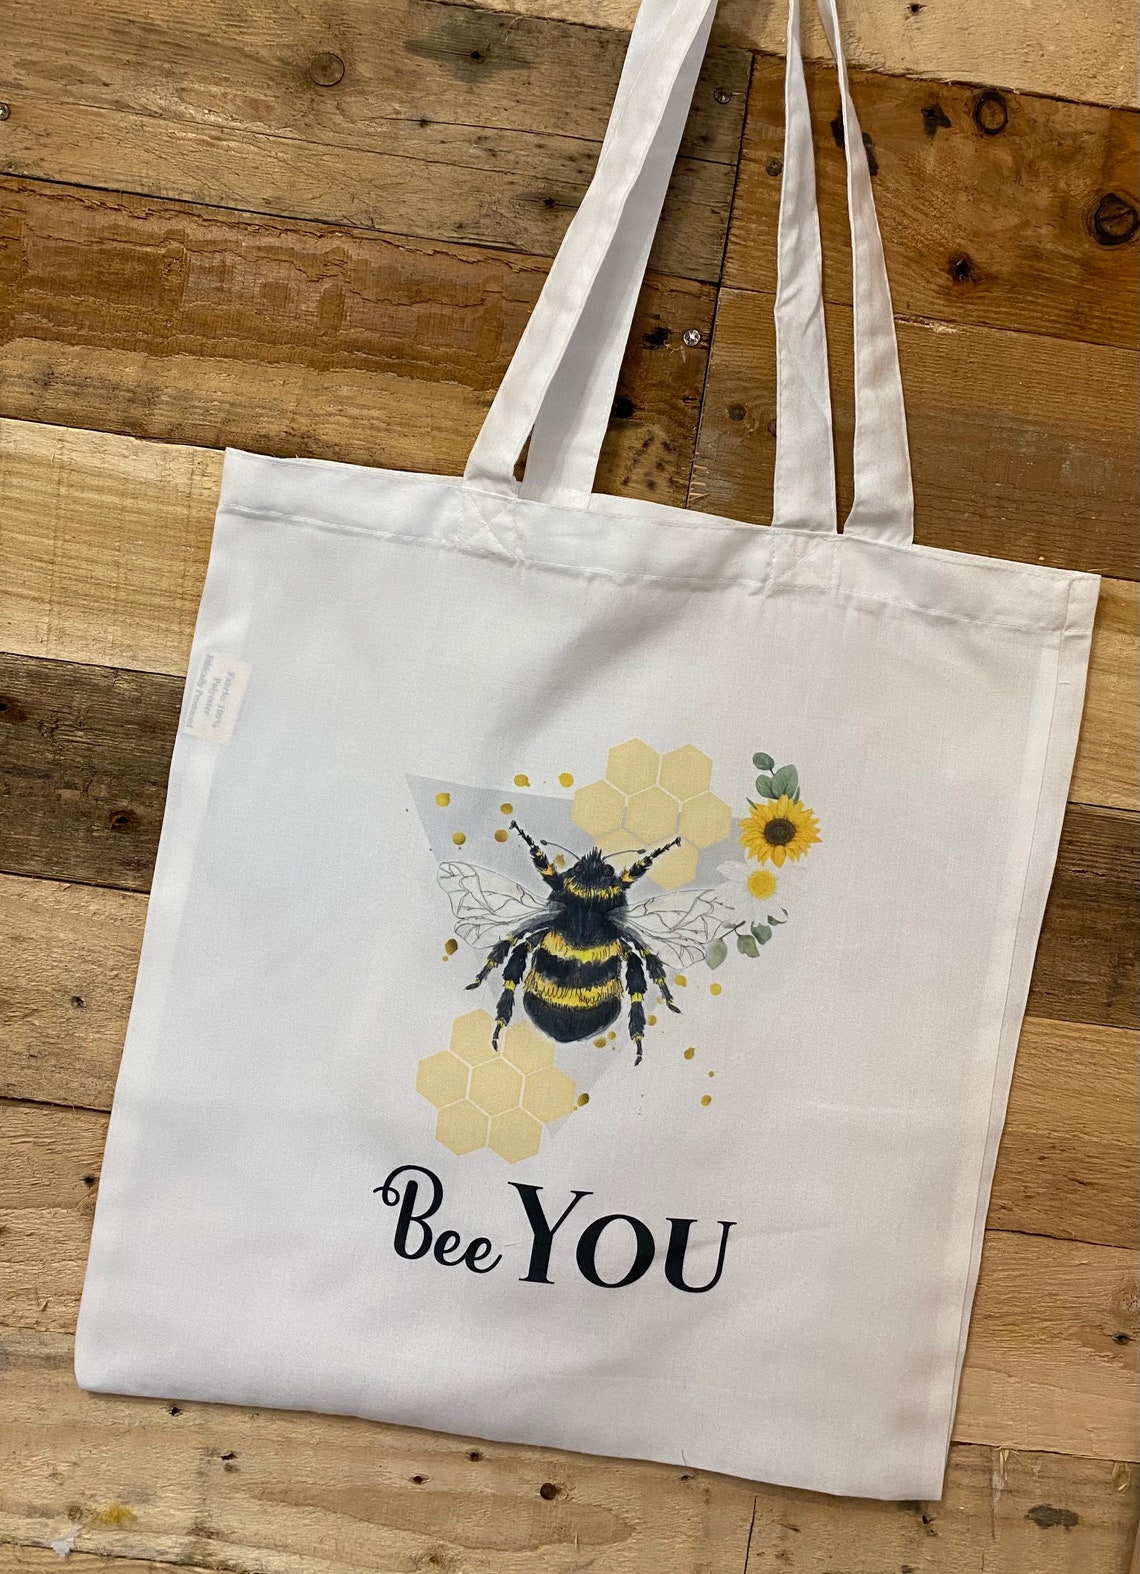 Bumble bee bag tote shopping bag lunch bag ladies gift | Etsy